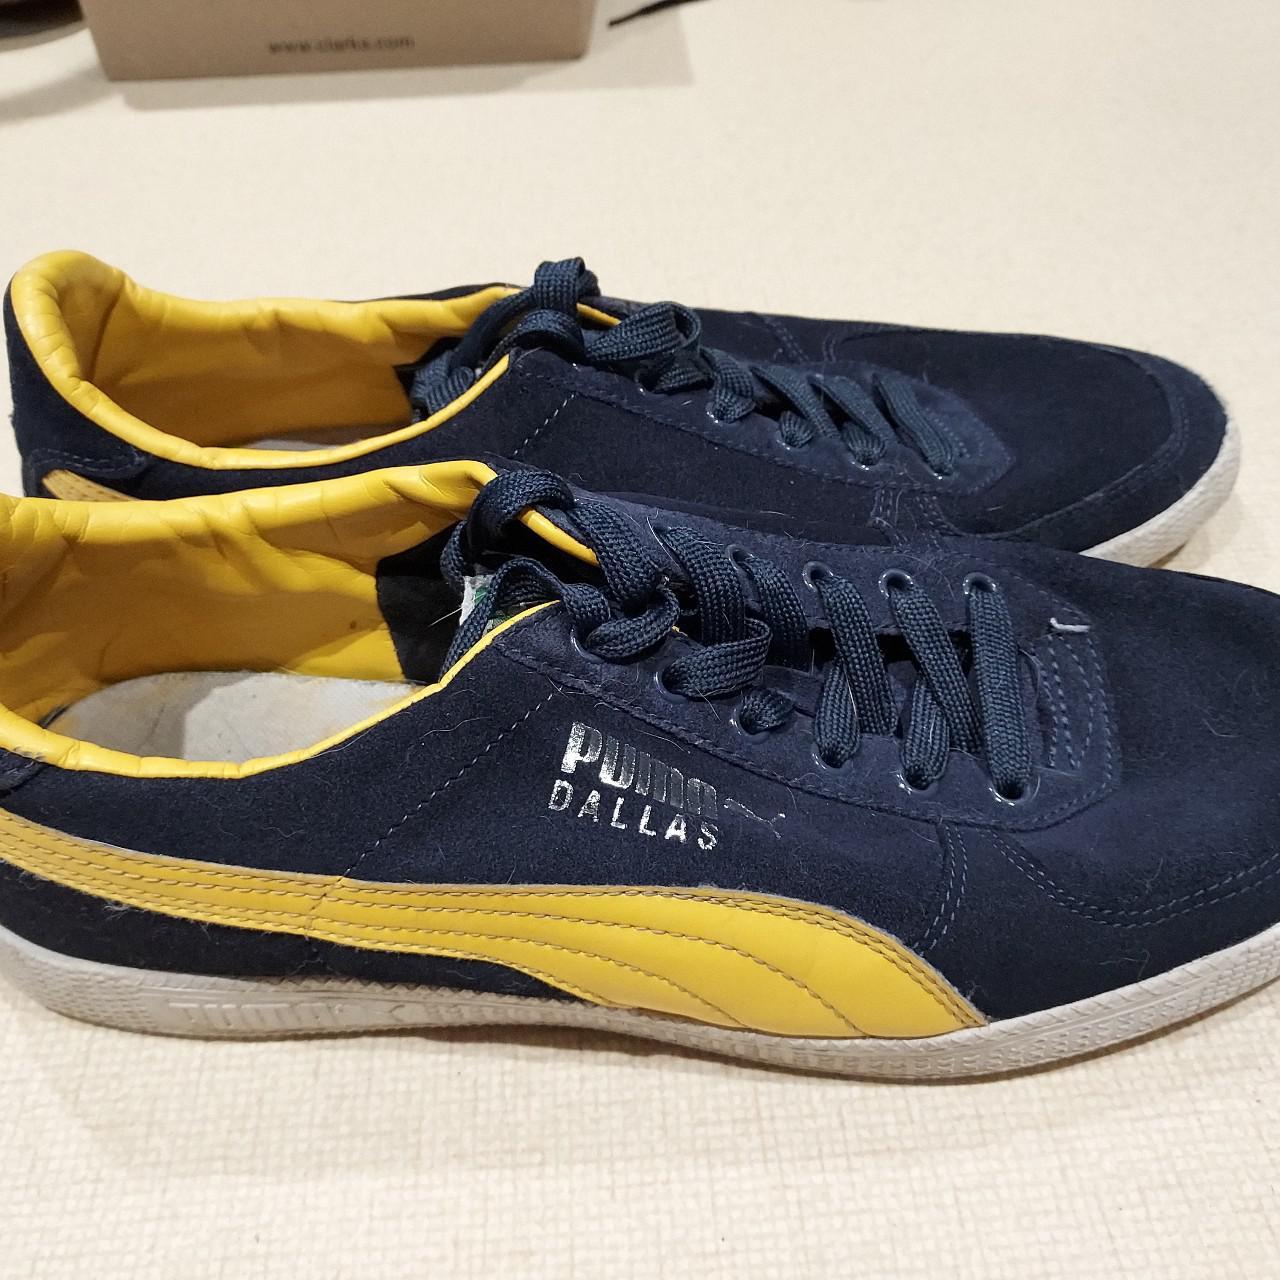 Product Image 2 - A good pair of puma